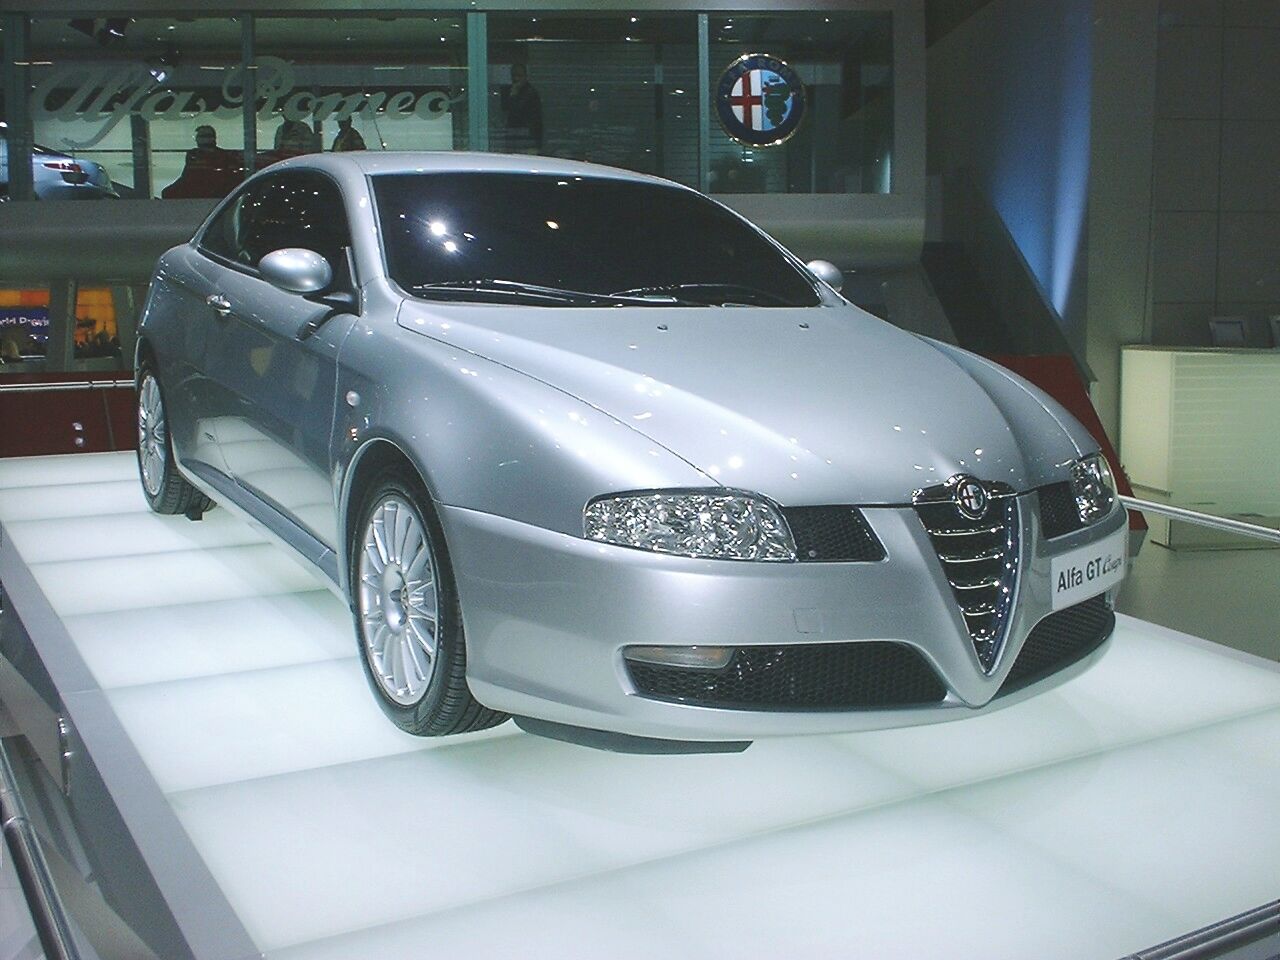 the Alfa Romeo Coupe GT received its world premiere at the Geneva Motor Show this week